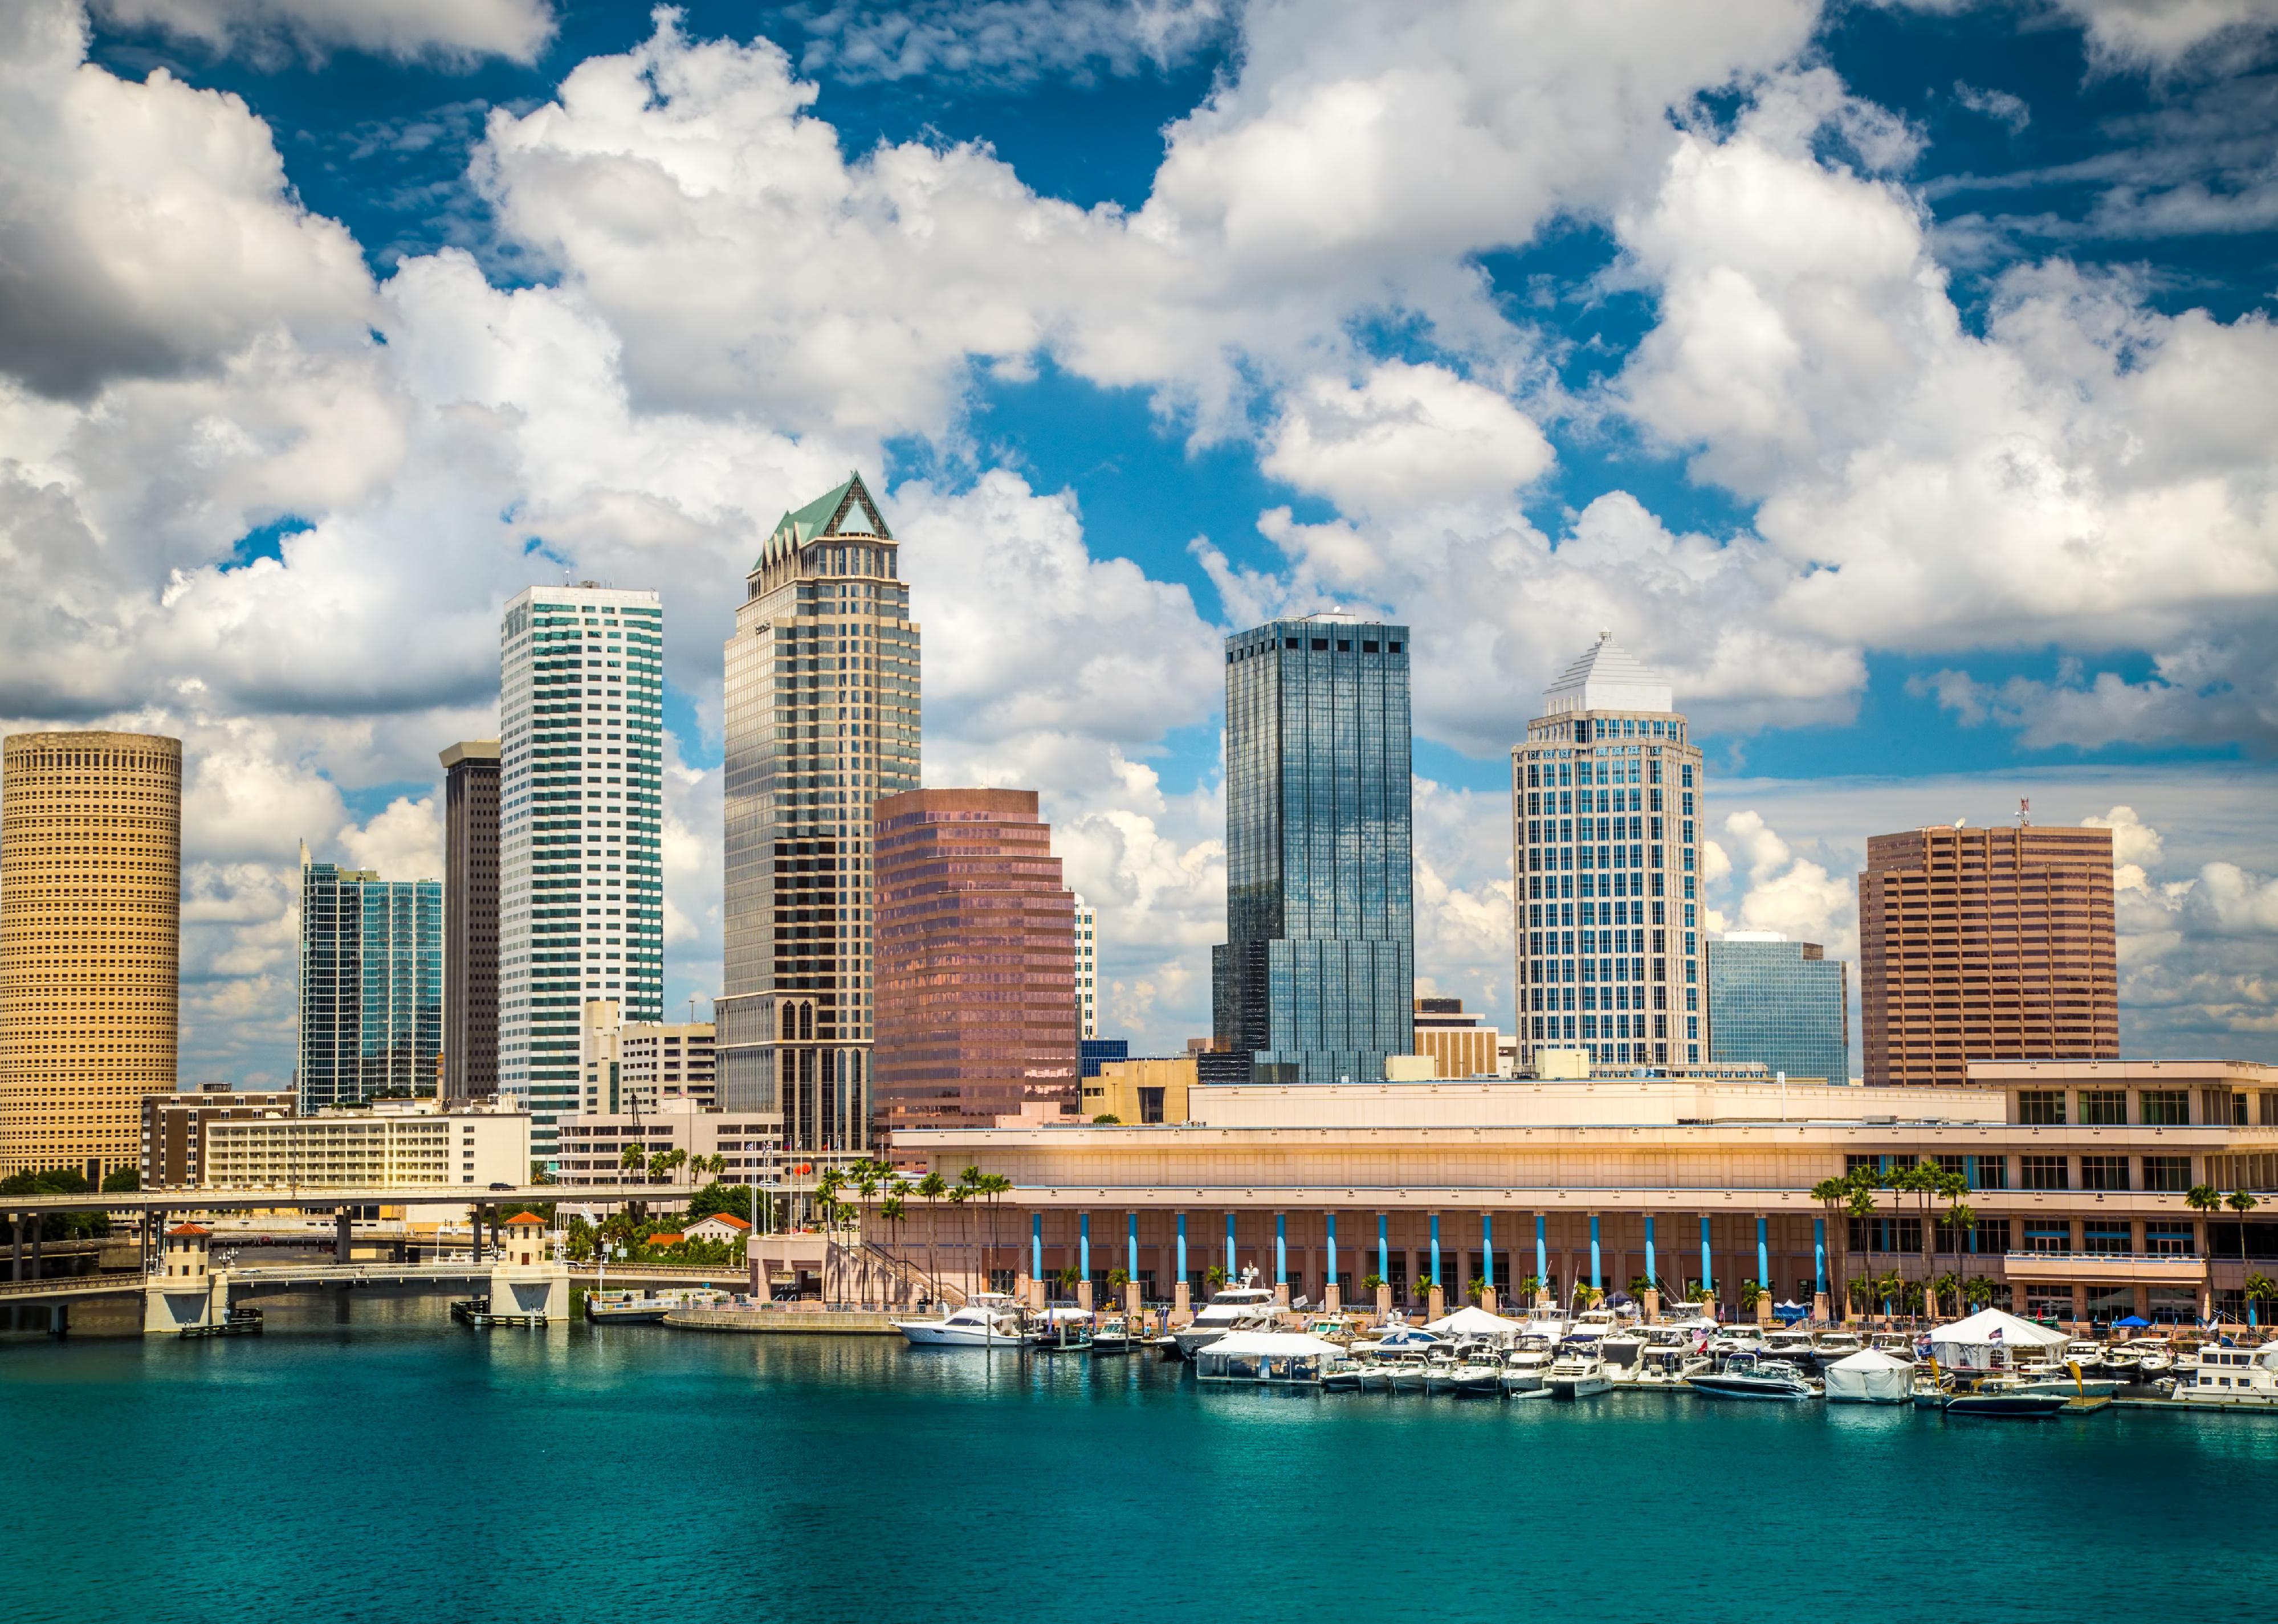 Tampa, Florida skyline with sun and clouds.